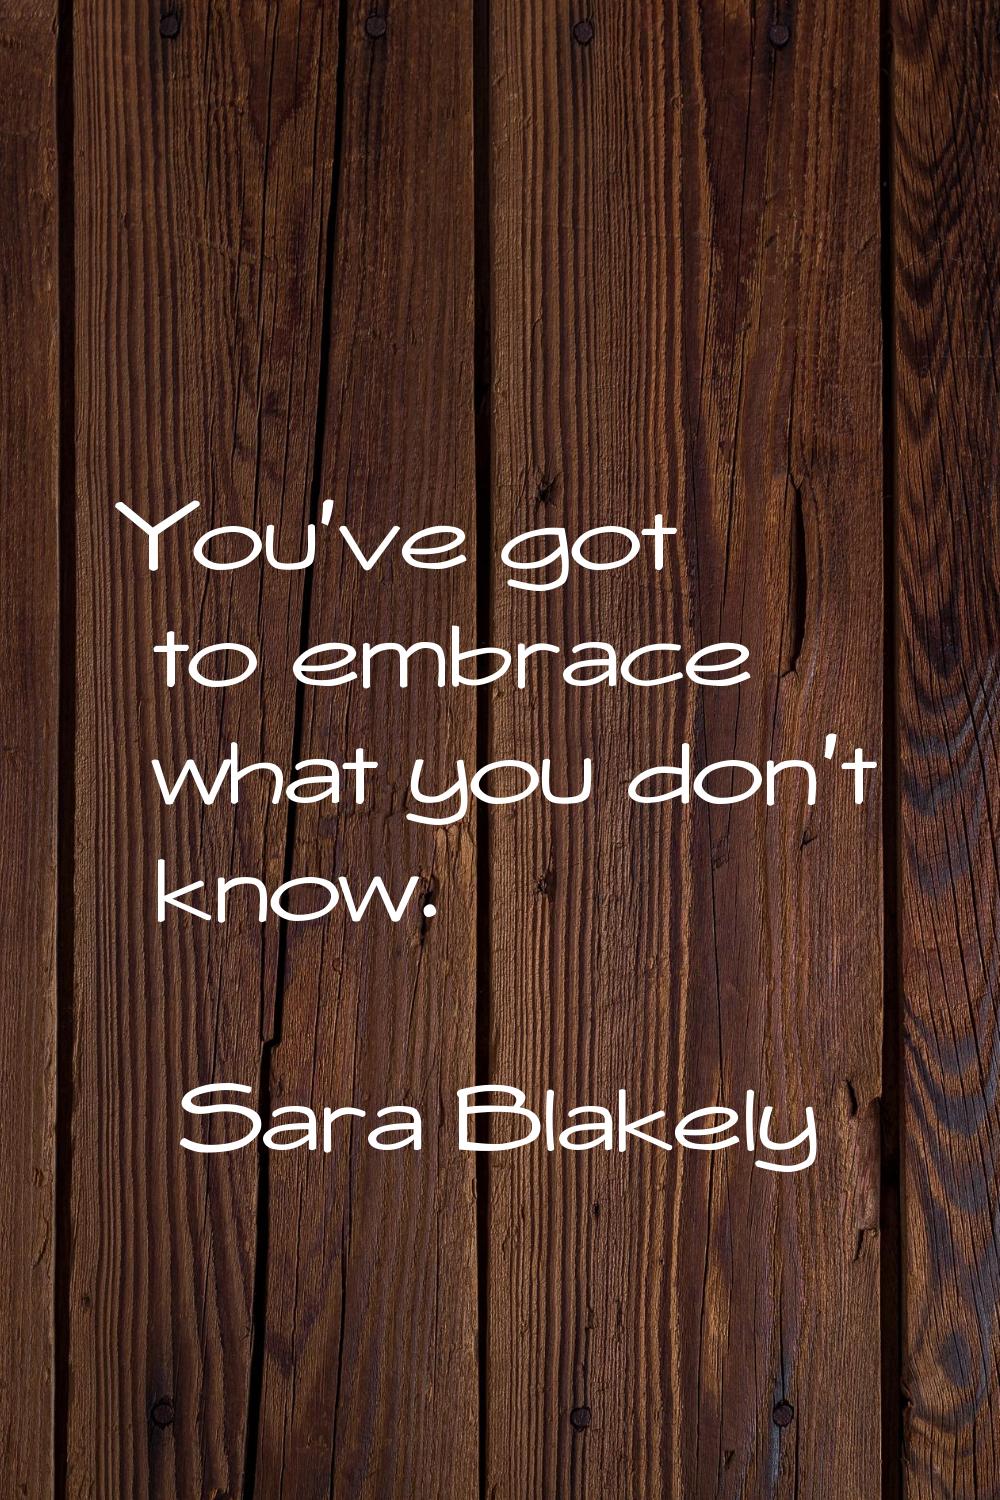 You've got to embrace what you don't know.